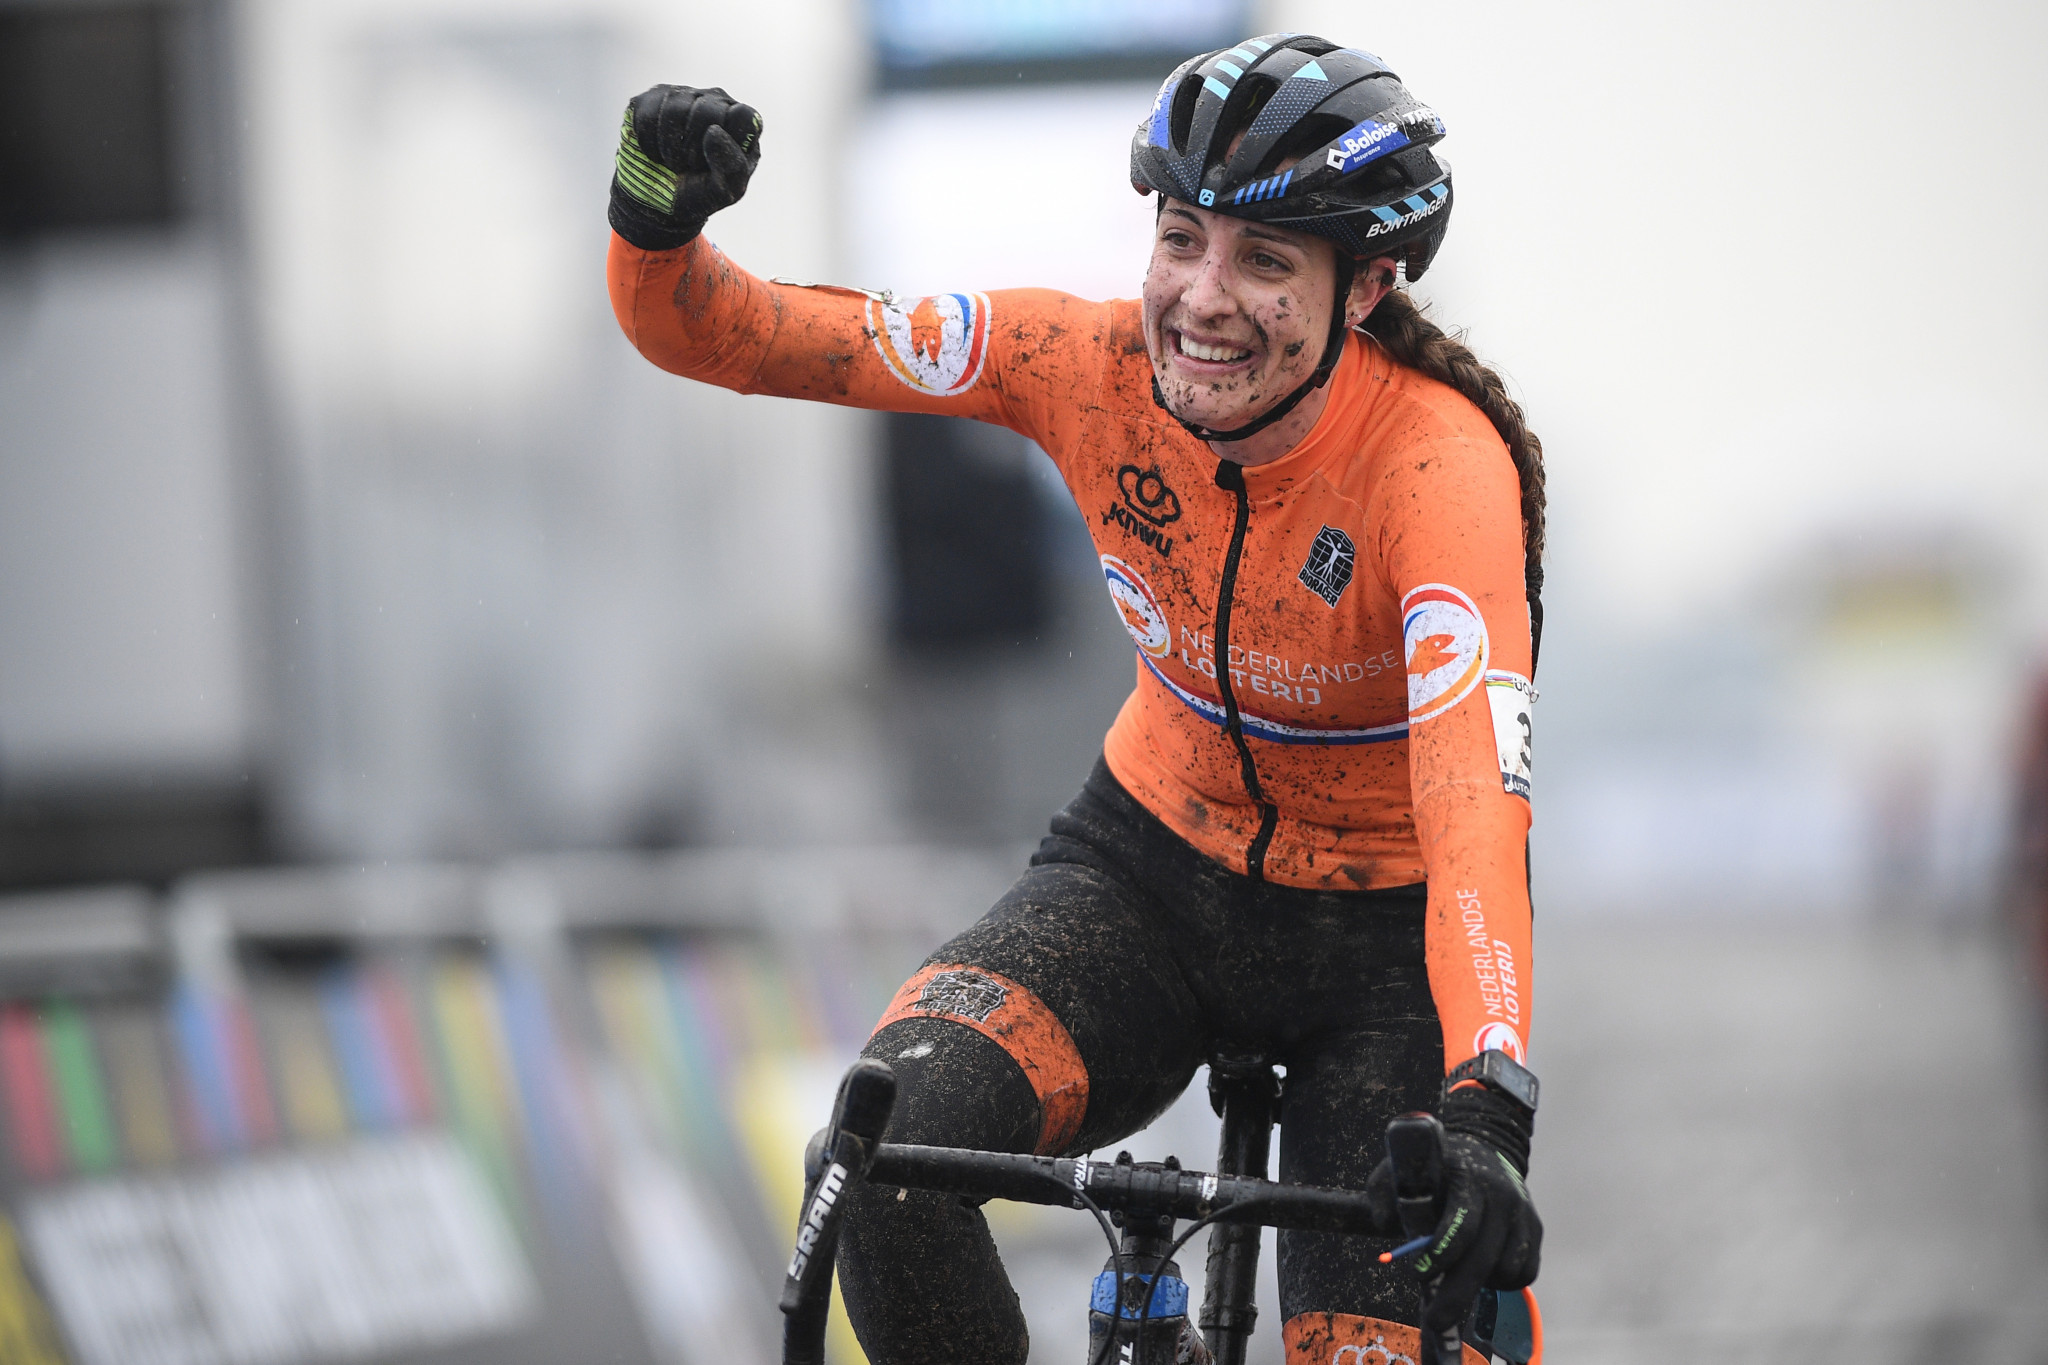 Brand triumphs in women's elite race at UCI Cyclo-cross World Championships